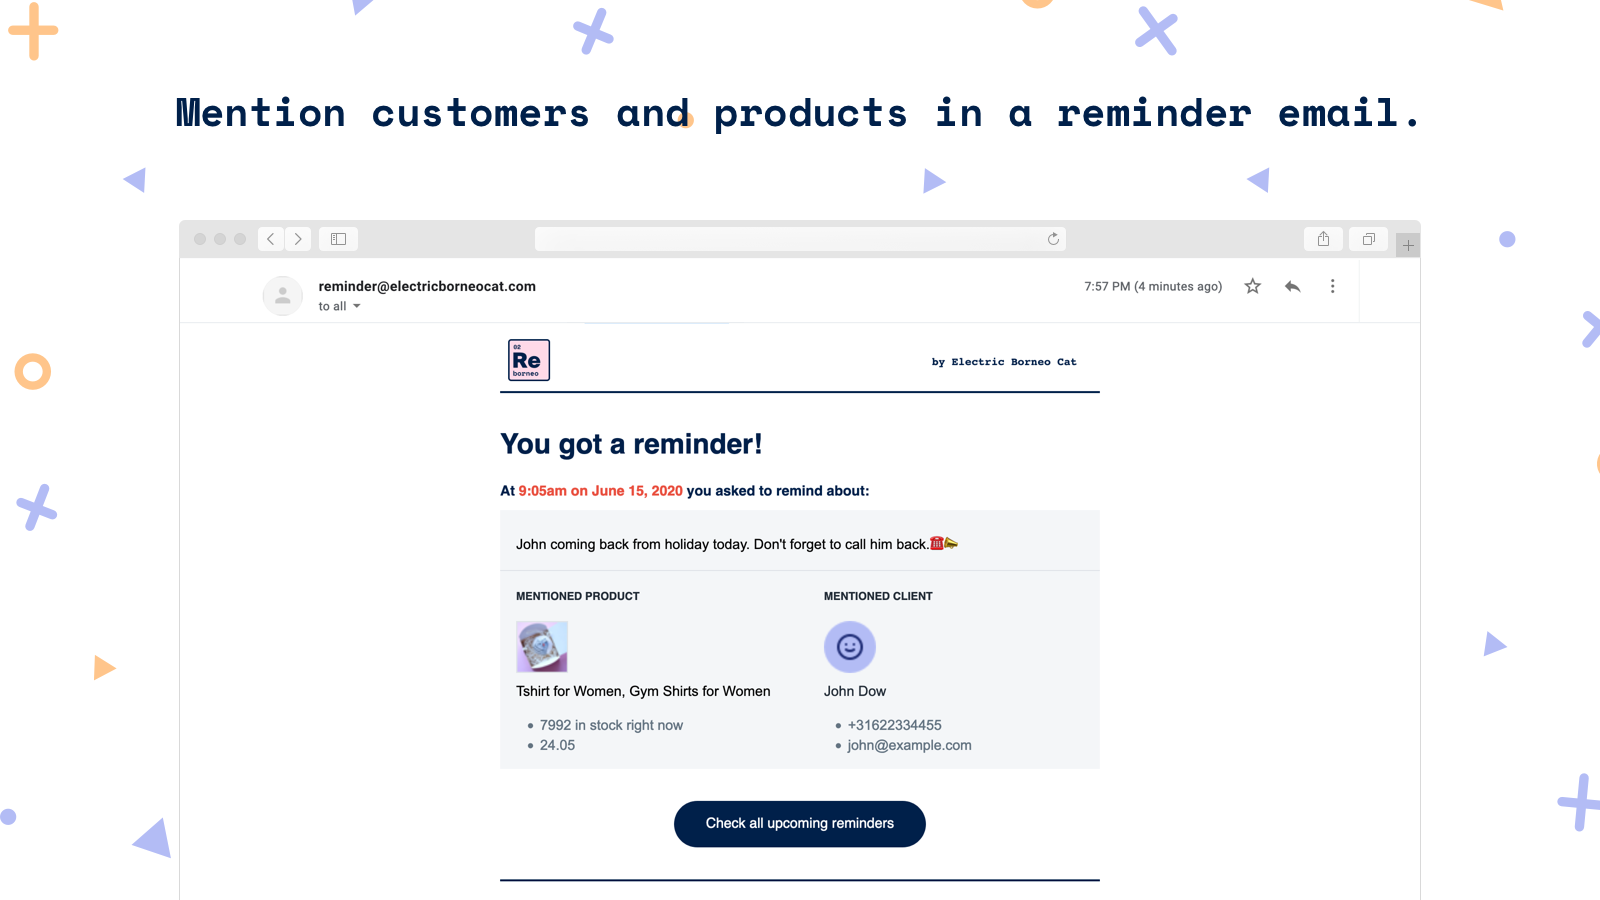 Mention customers and products in a reminder email.